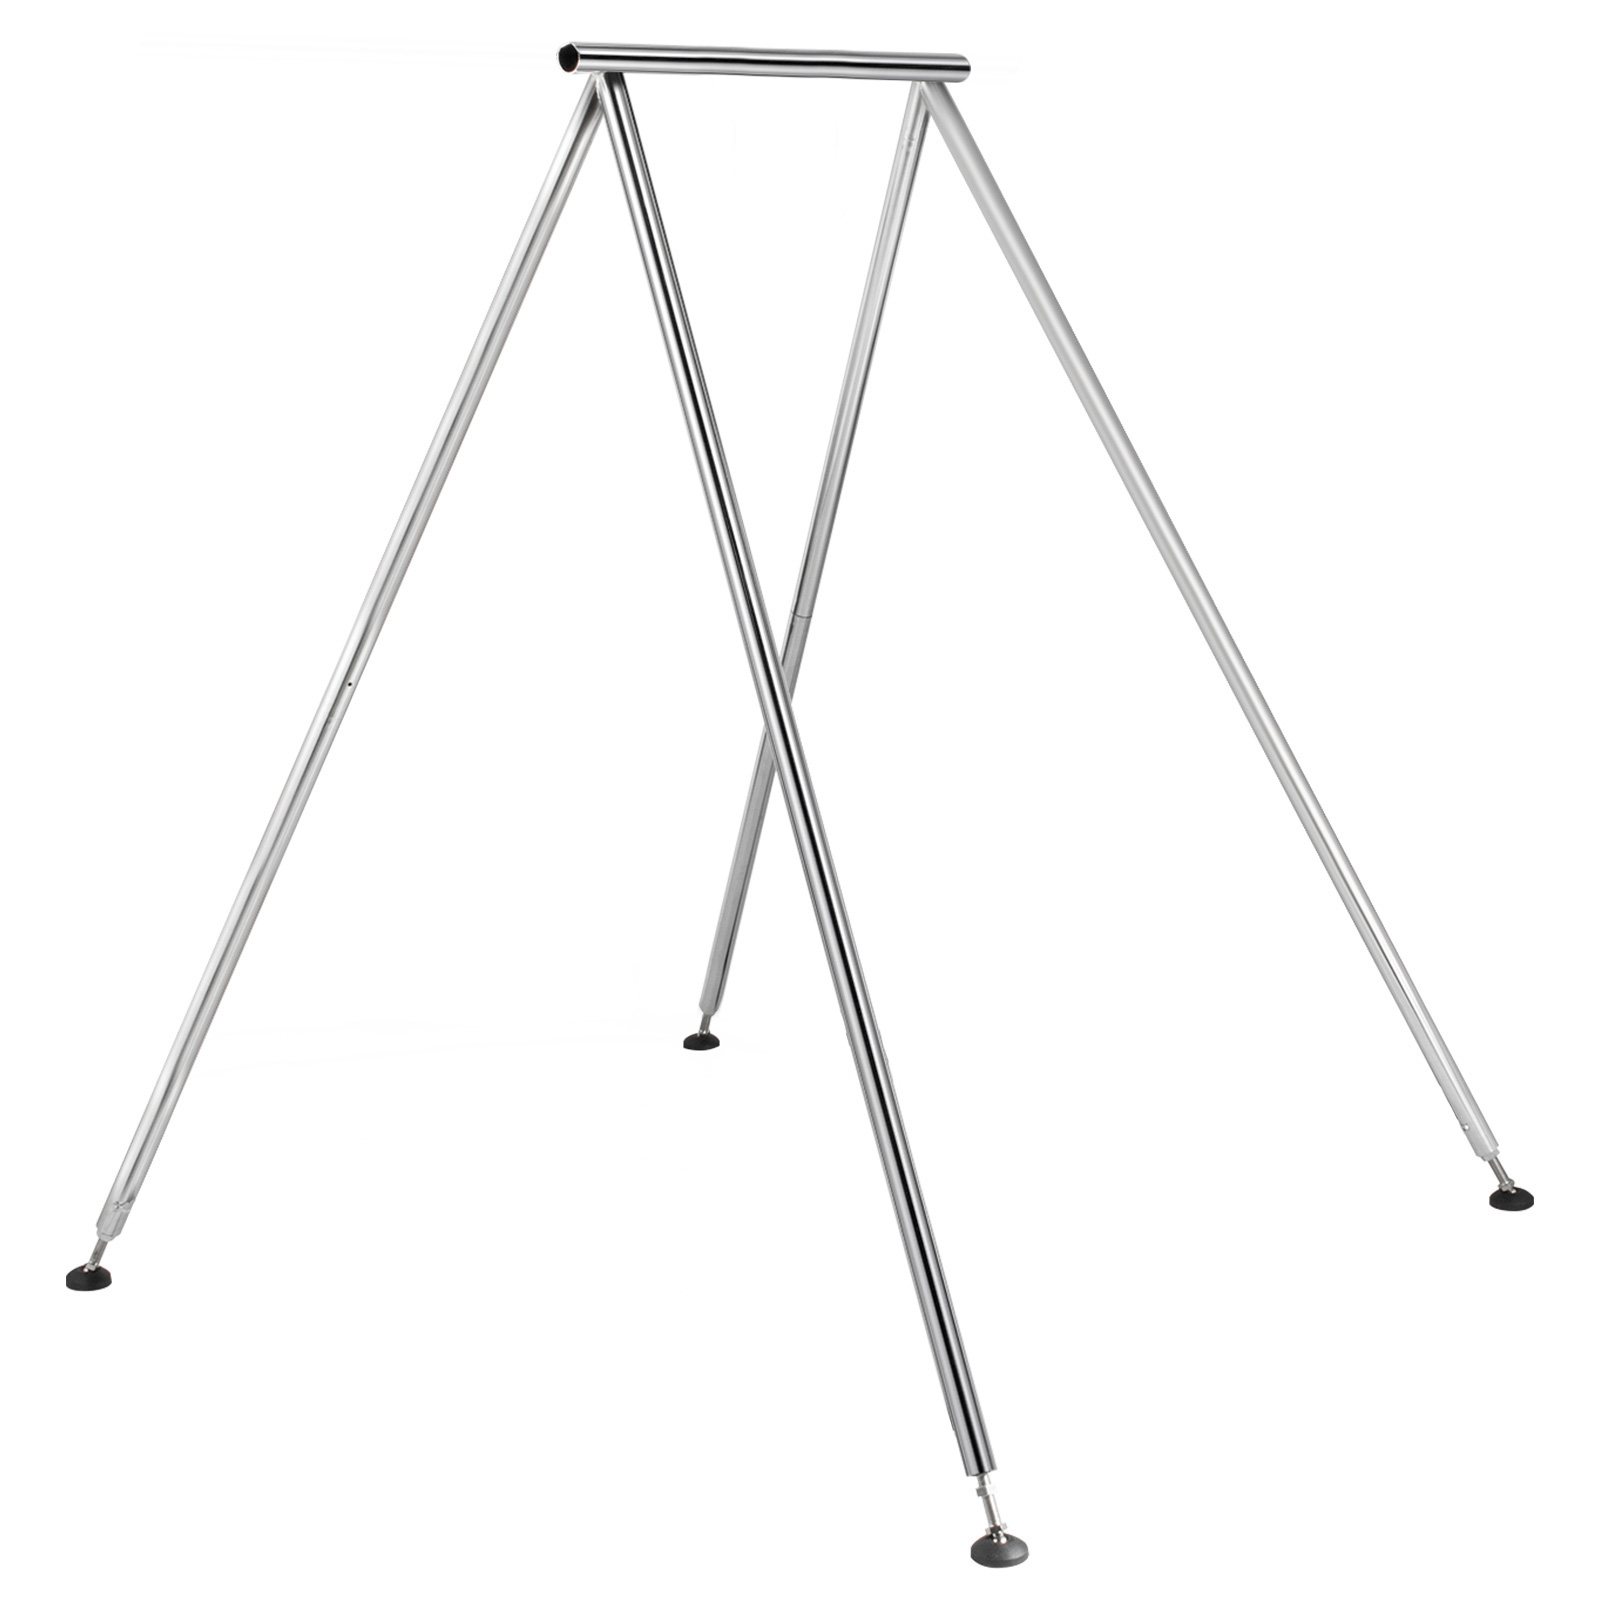 Aerial Yoga Stand Frame - Steel Yoga Trapeze Stand Support Up to 550 LBs  for Indoor & Outdoor - Perfect Yoga & Gymnastics Equipment Stand for Hooks